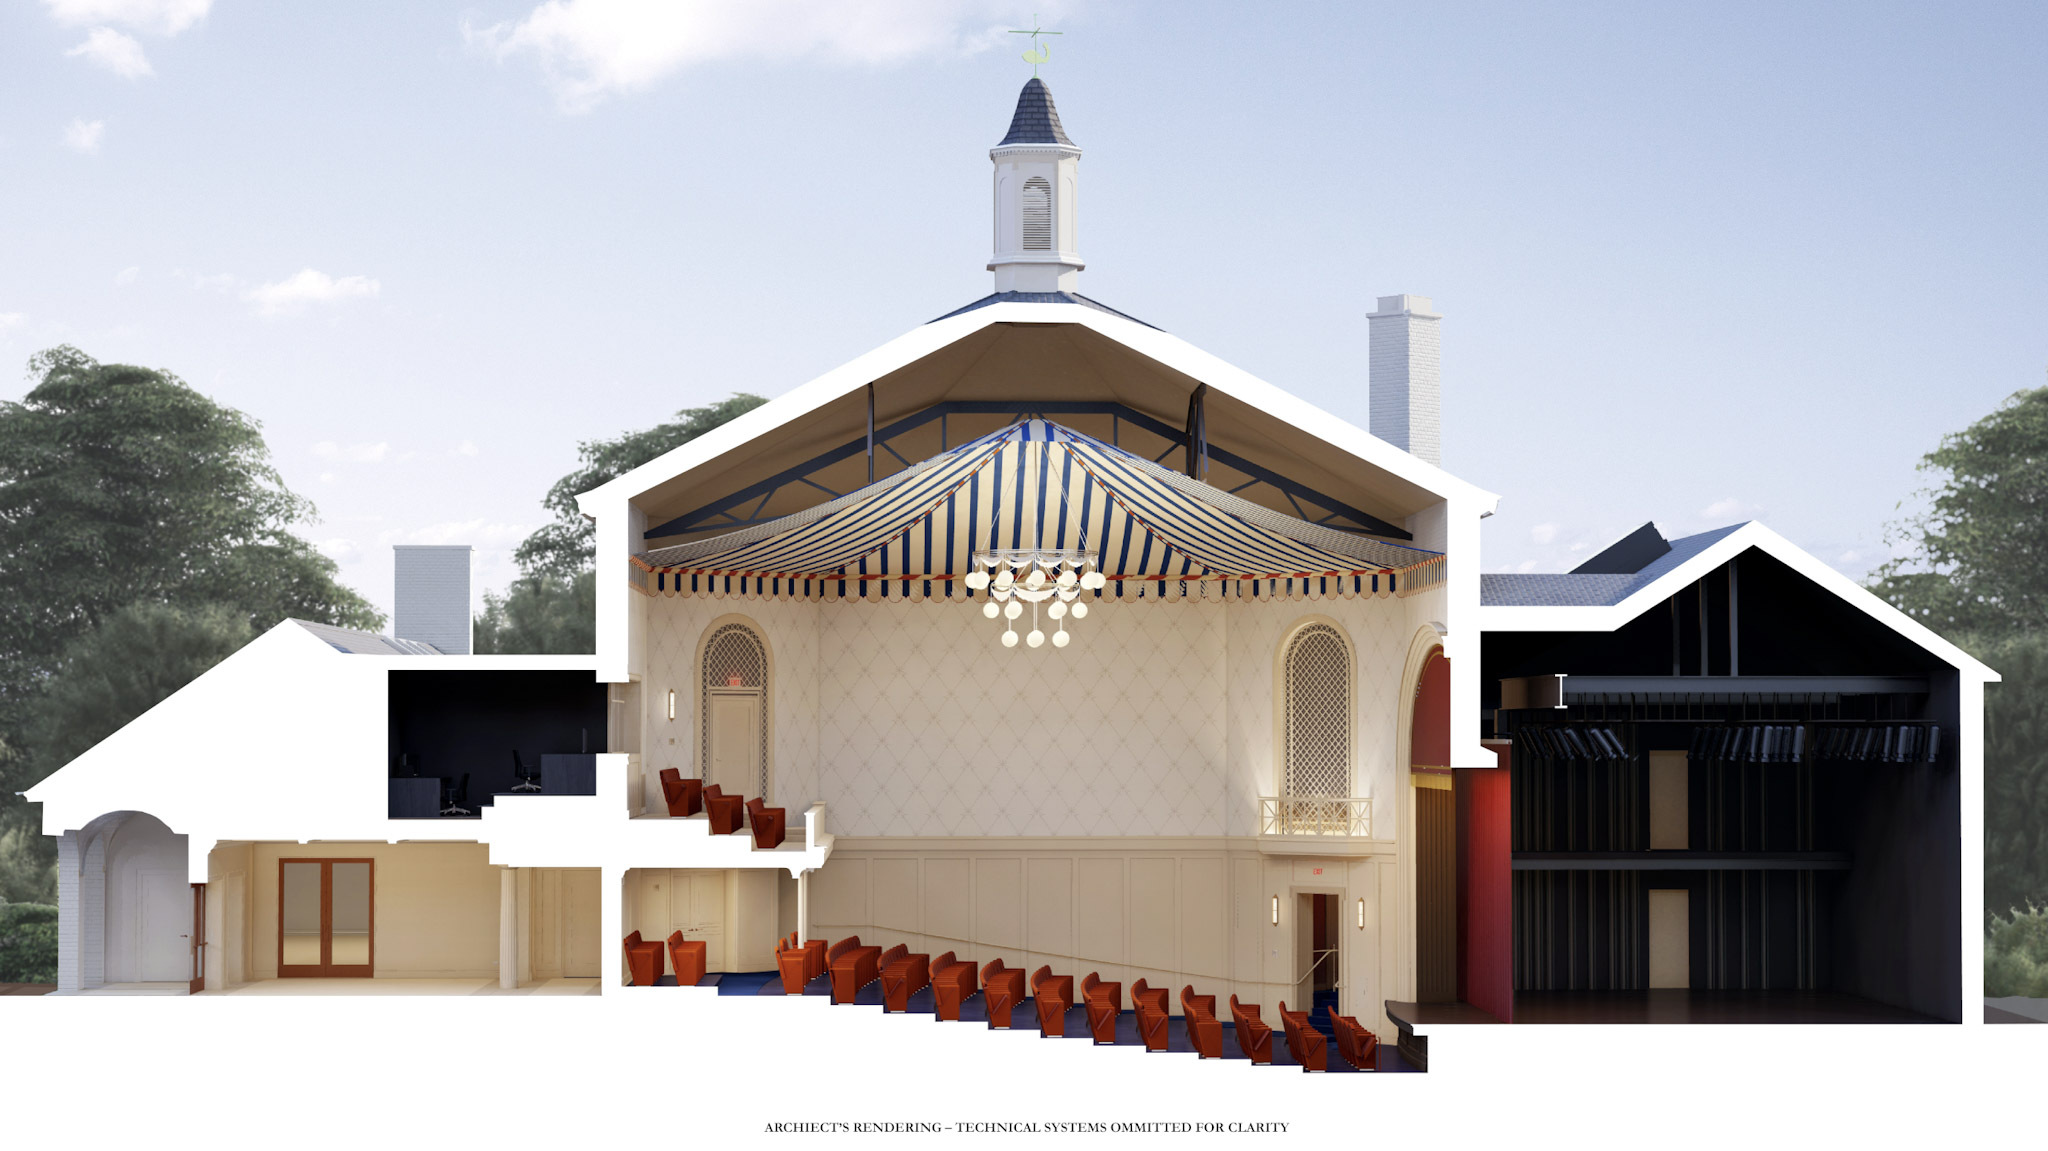 Retaining the circus tent motif was a nod to a chorus of criticism from a small group of residents when Guild Hall proposed a much more extensive remaking of the John Drew Theater.